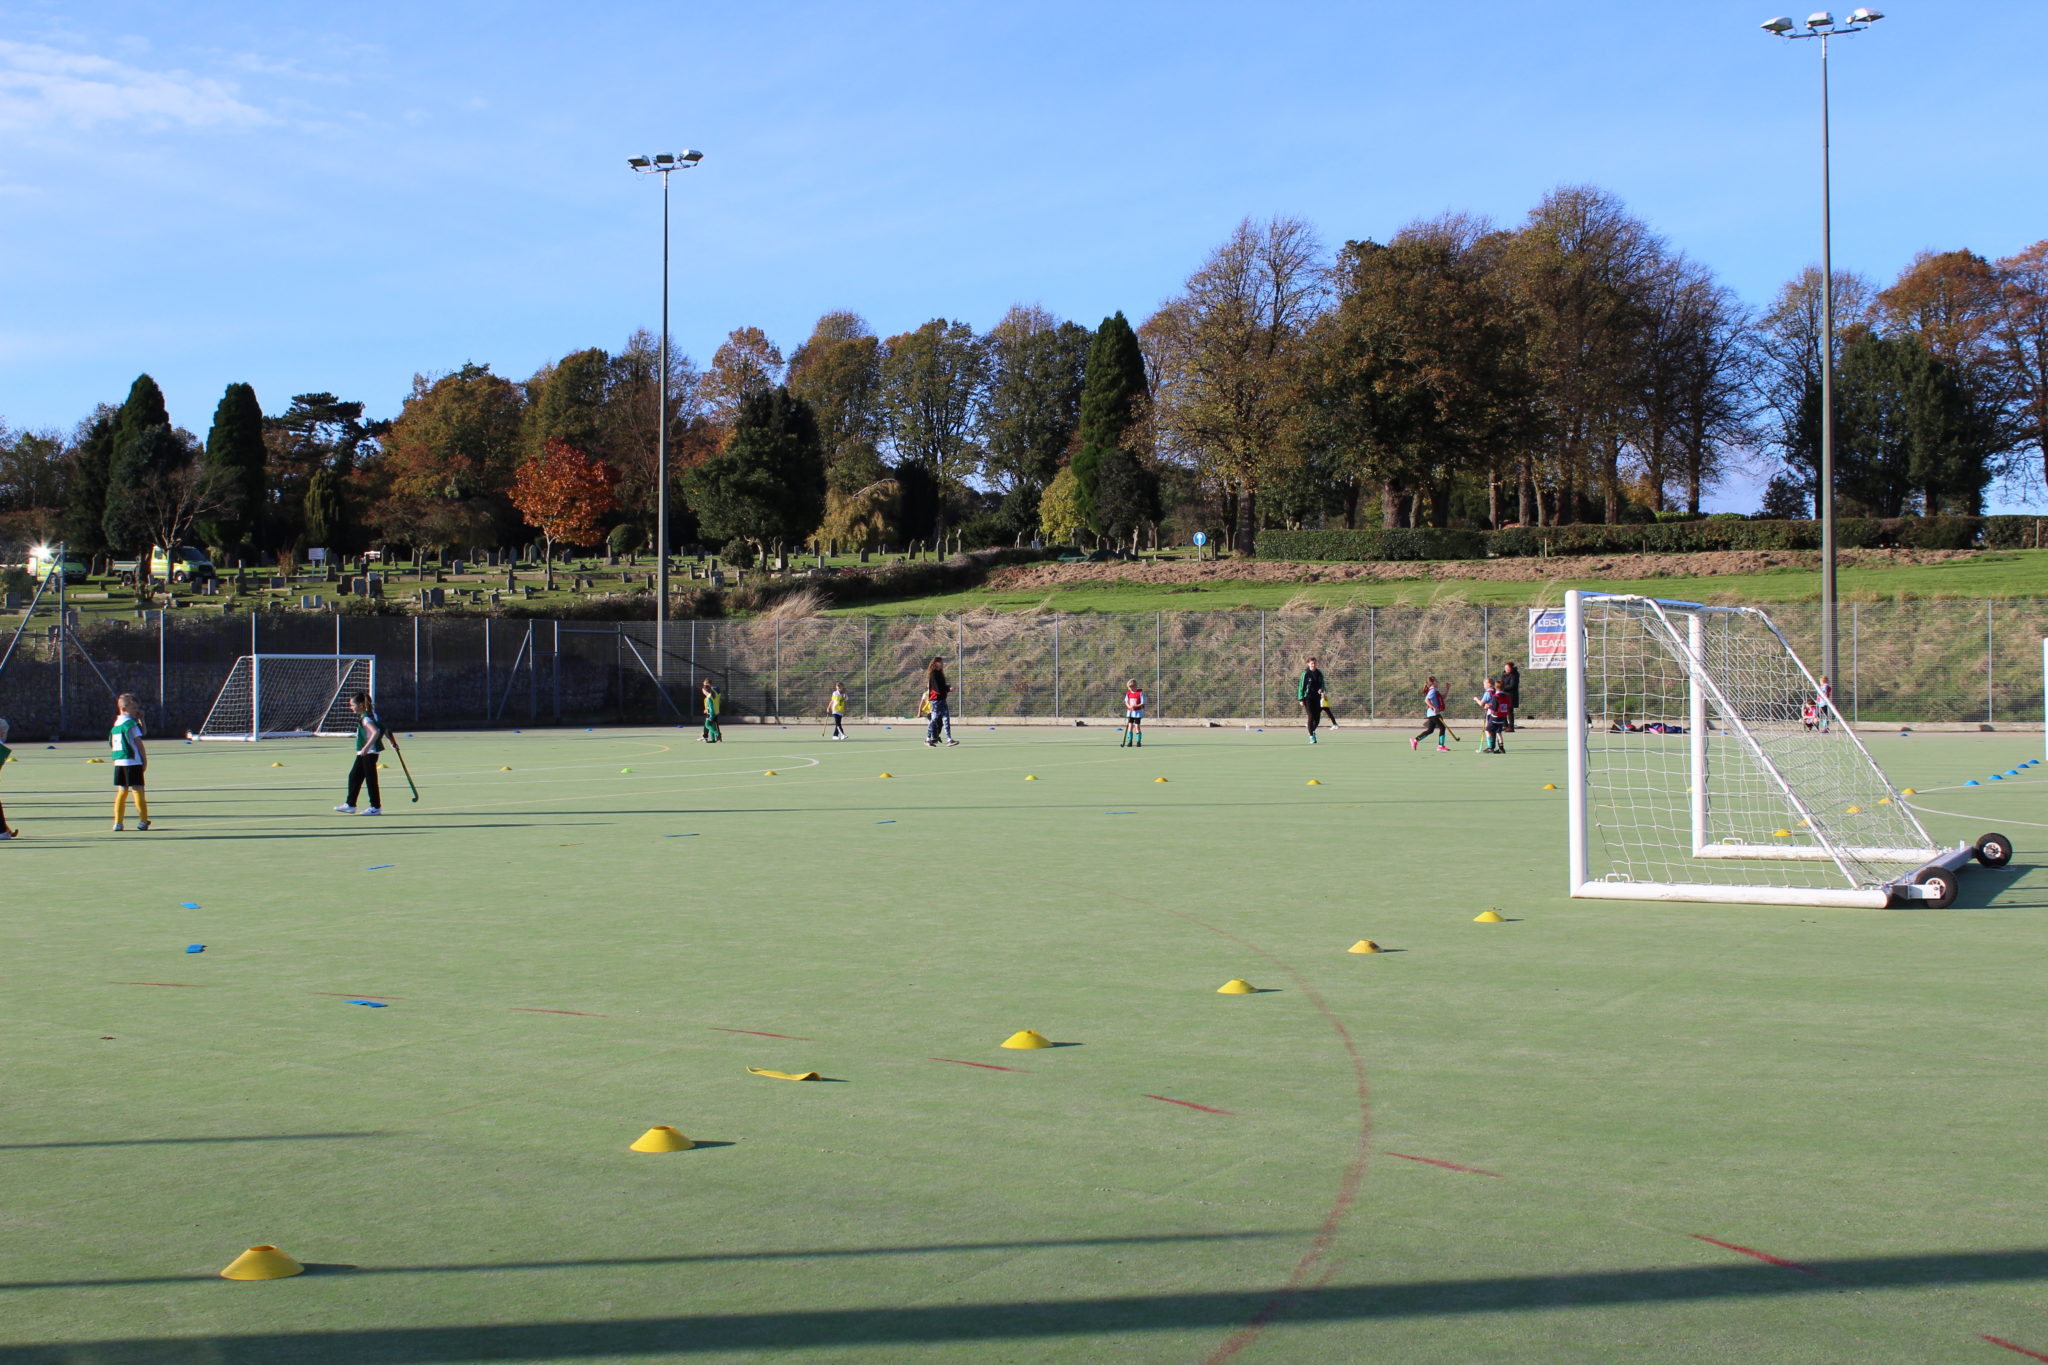 Hockey, Astroturf, London Road Pavilion, Louth, Lincolnshire